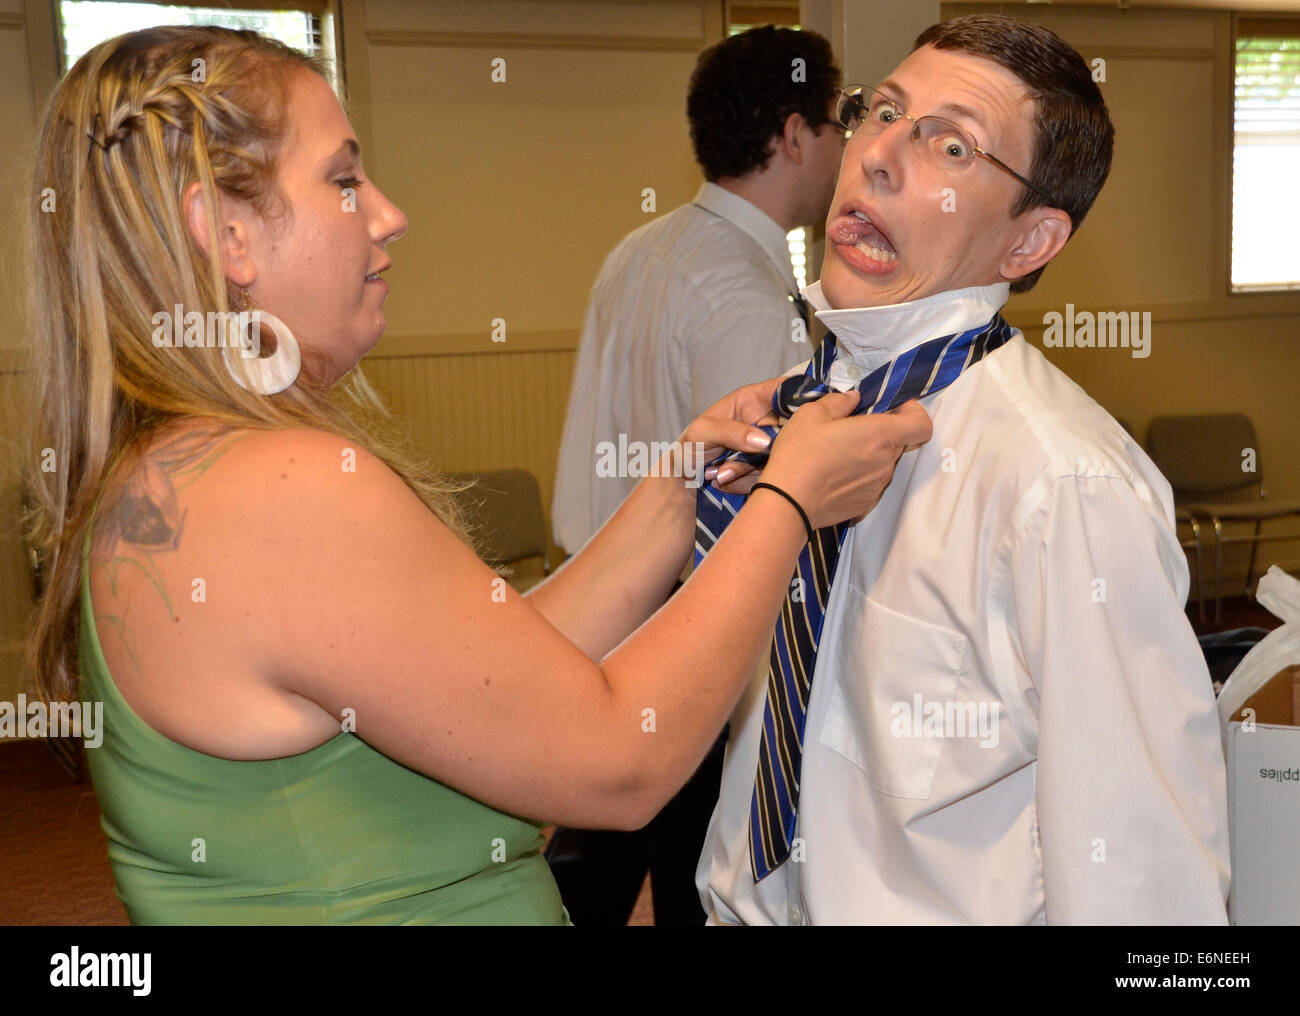 man goofs off as a woman tries to tie hs tie for him Stock Photo